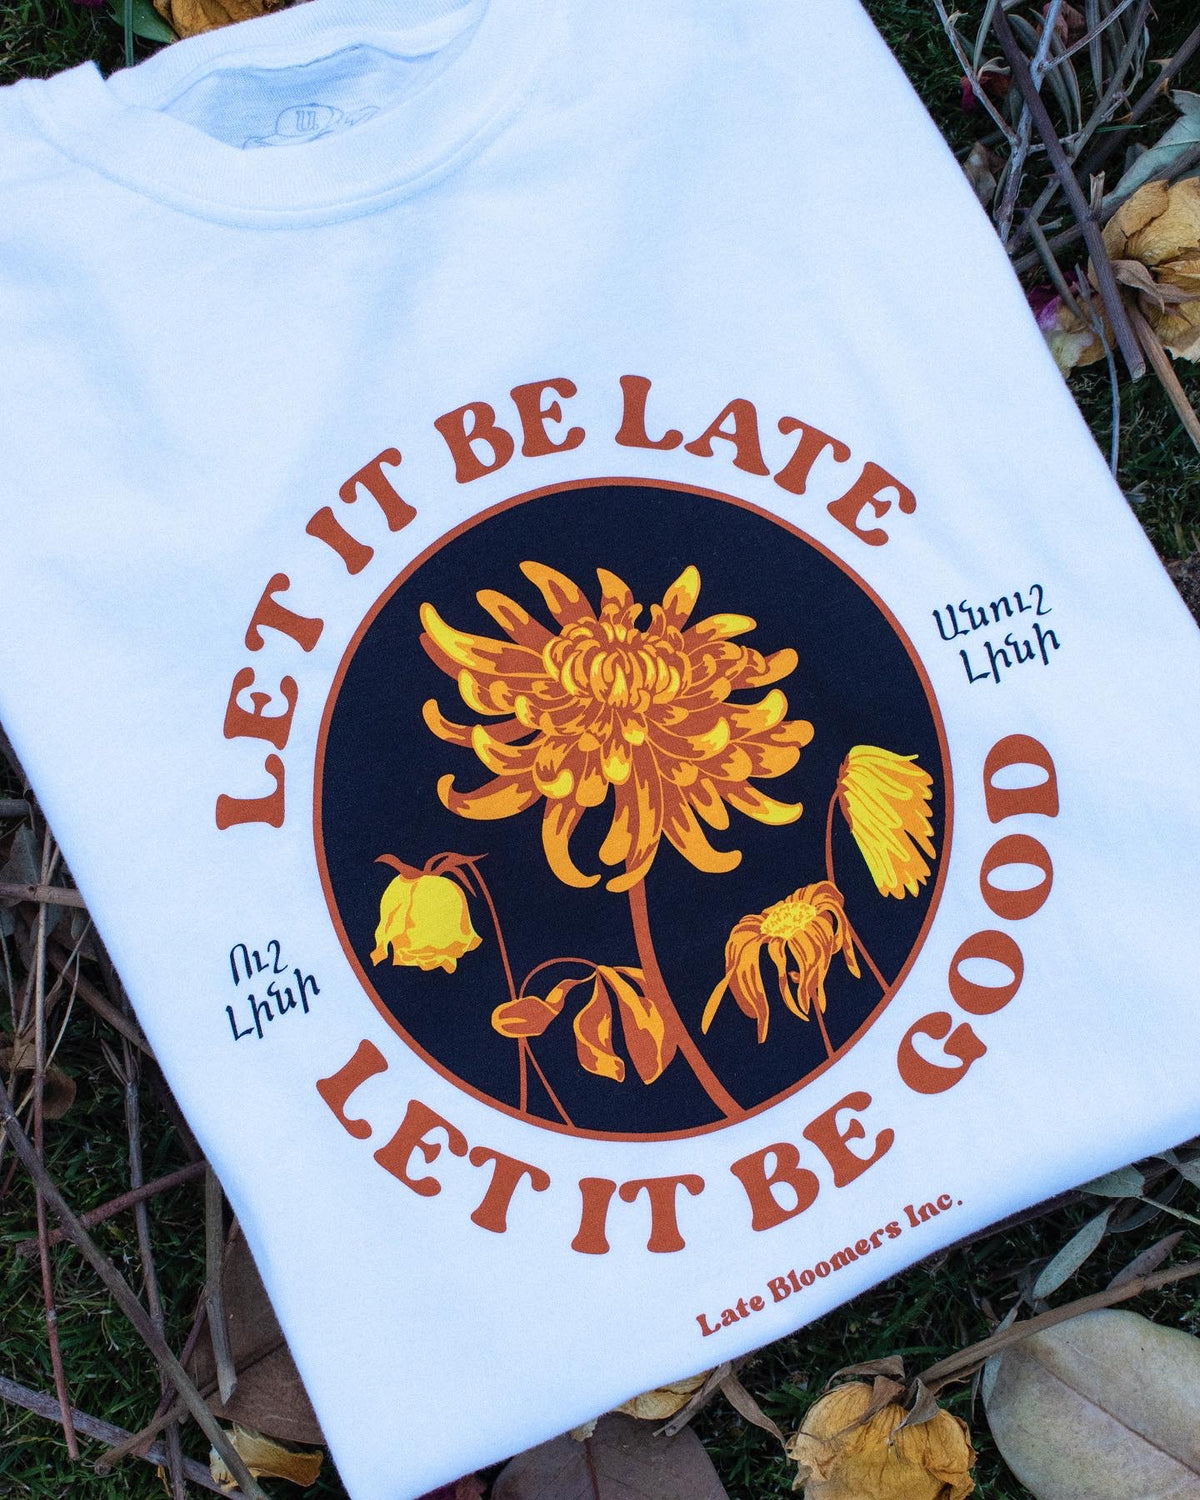 🚨ONLY ONE🚨 Let it be Late Armenian Proverb Vintage T-Shirt - MEDIUM